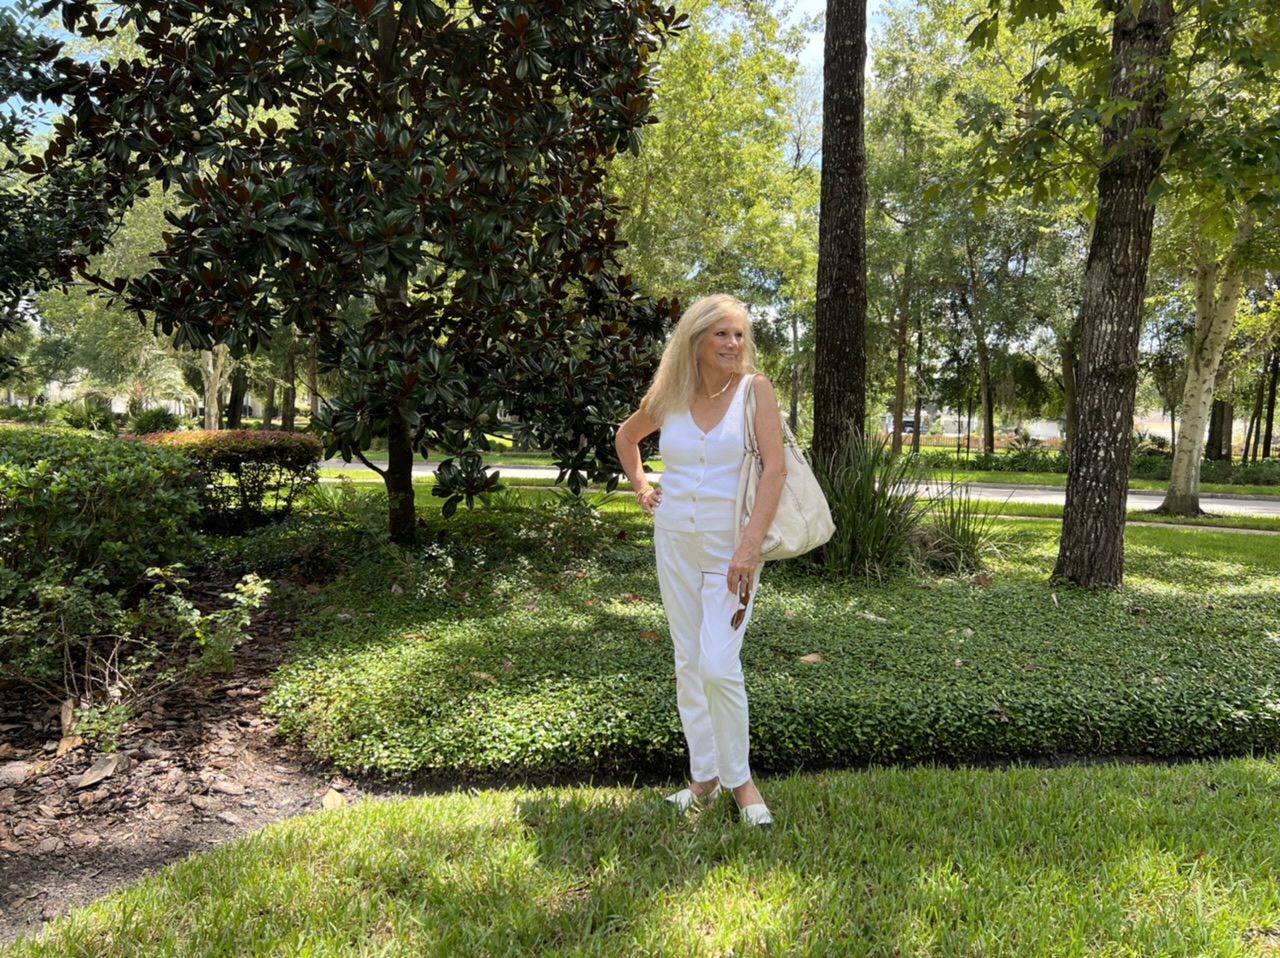 Woman standing under the trees dressed in all white